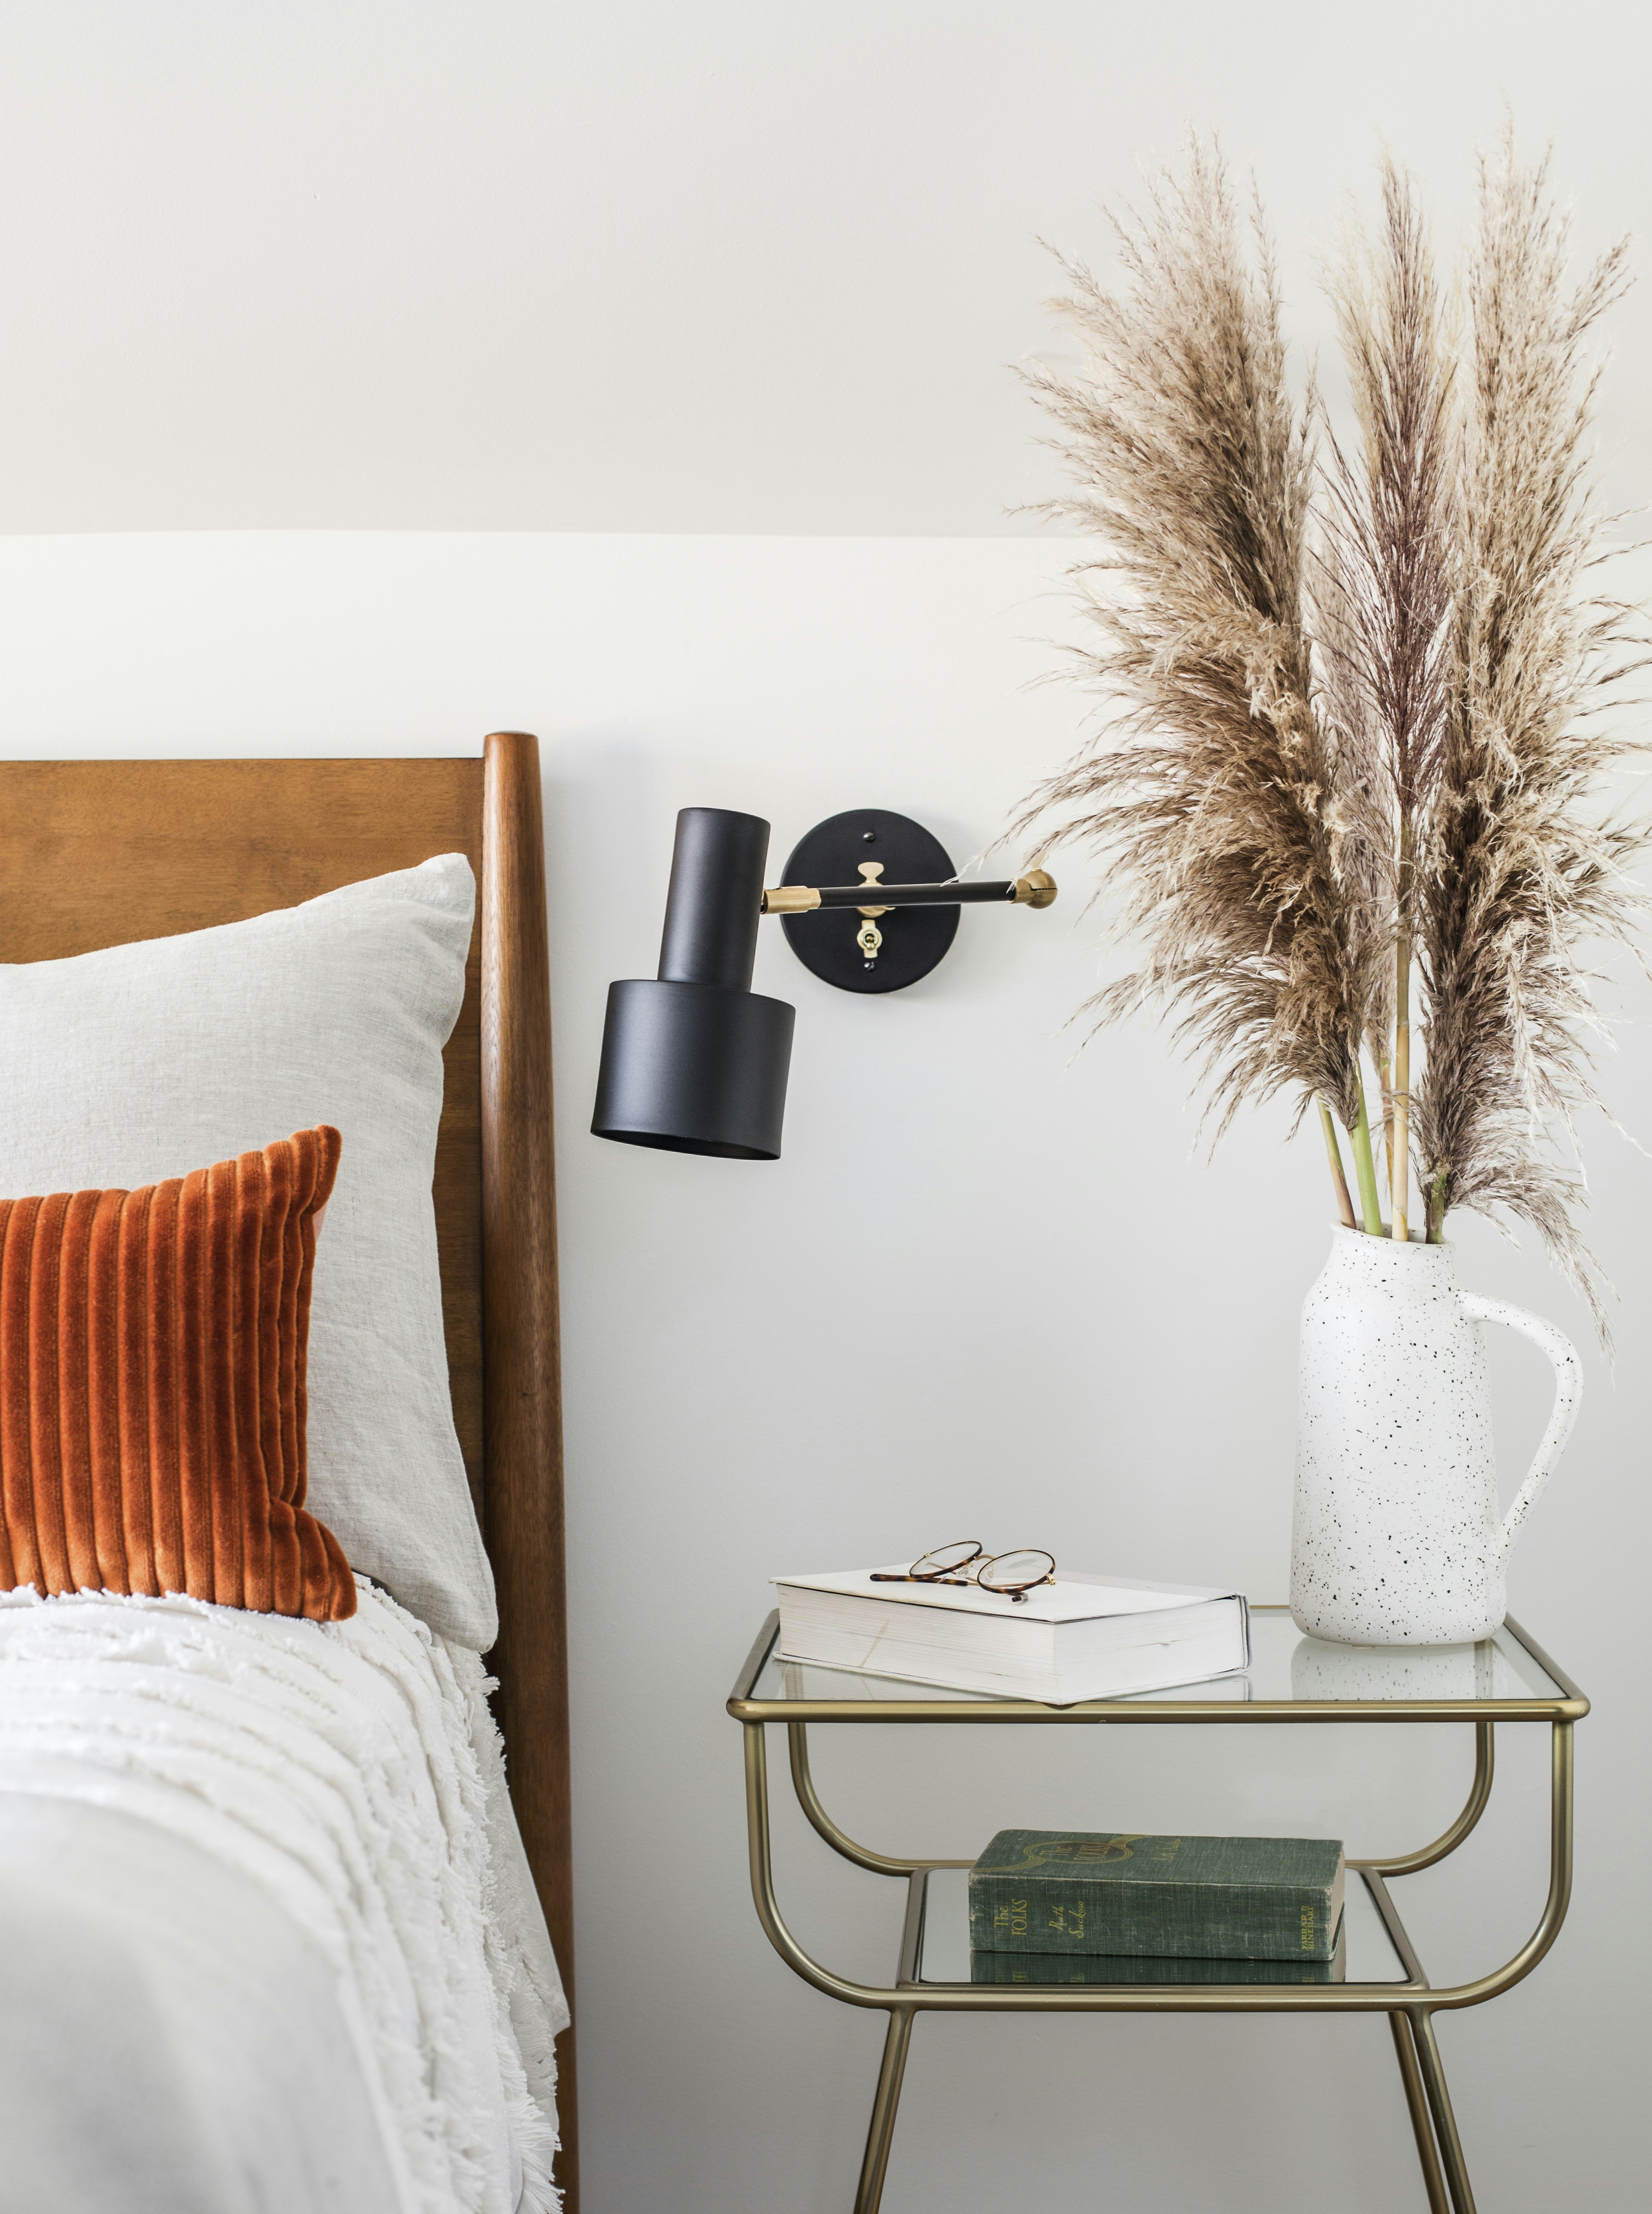 24 Indoor Wall Sconces We Love for Less Than $100 - Dwell